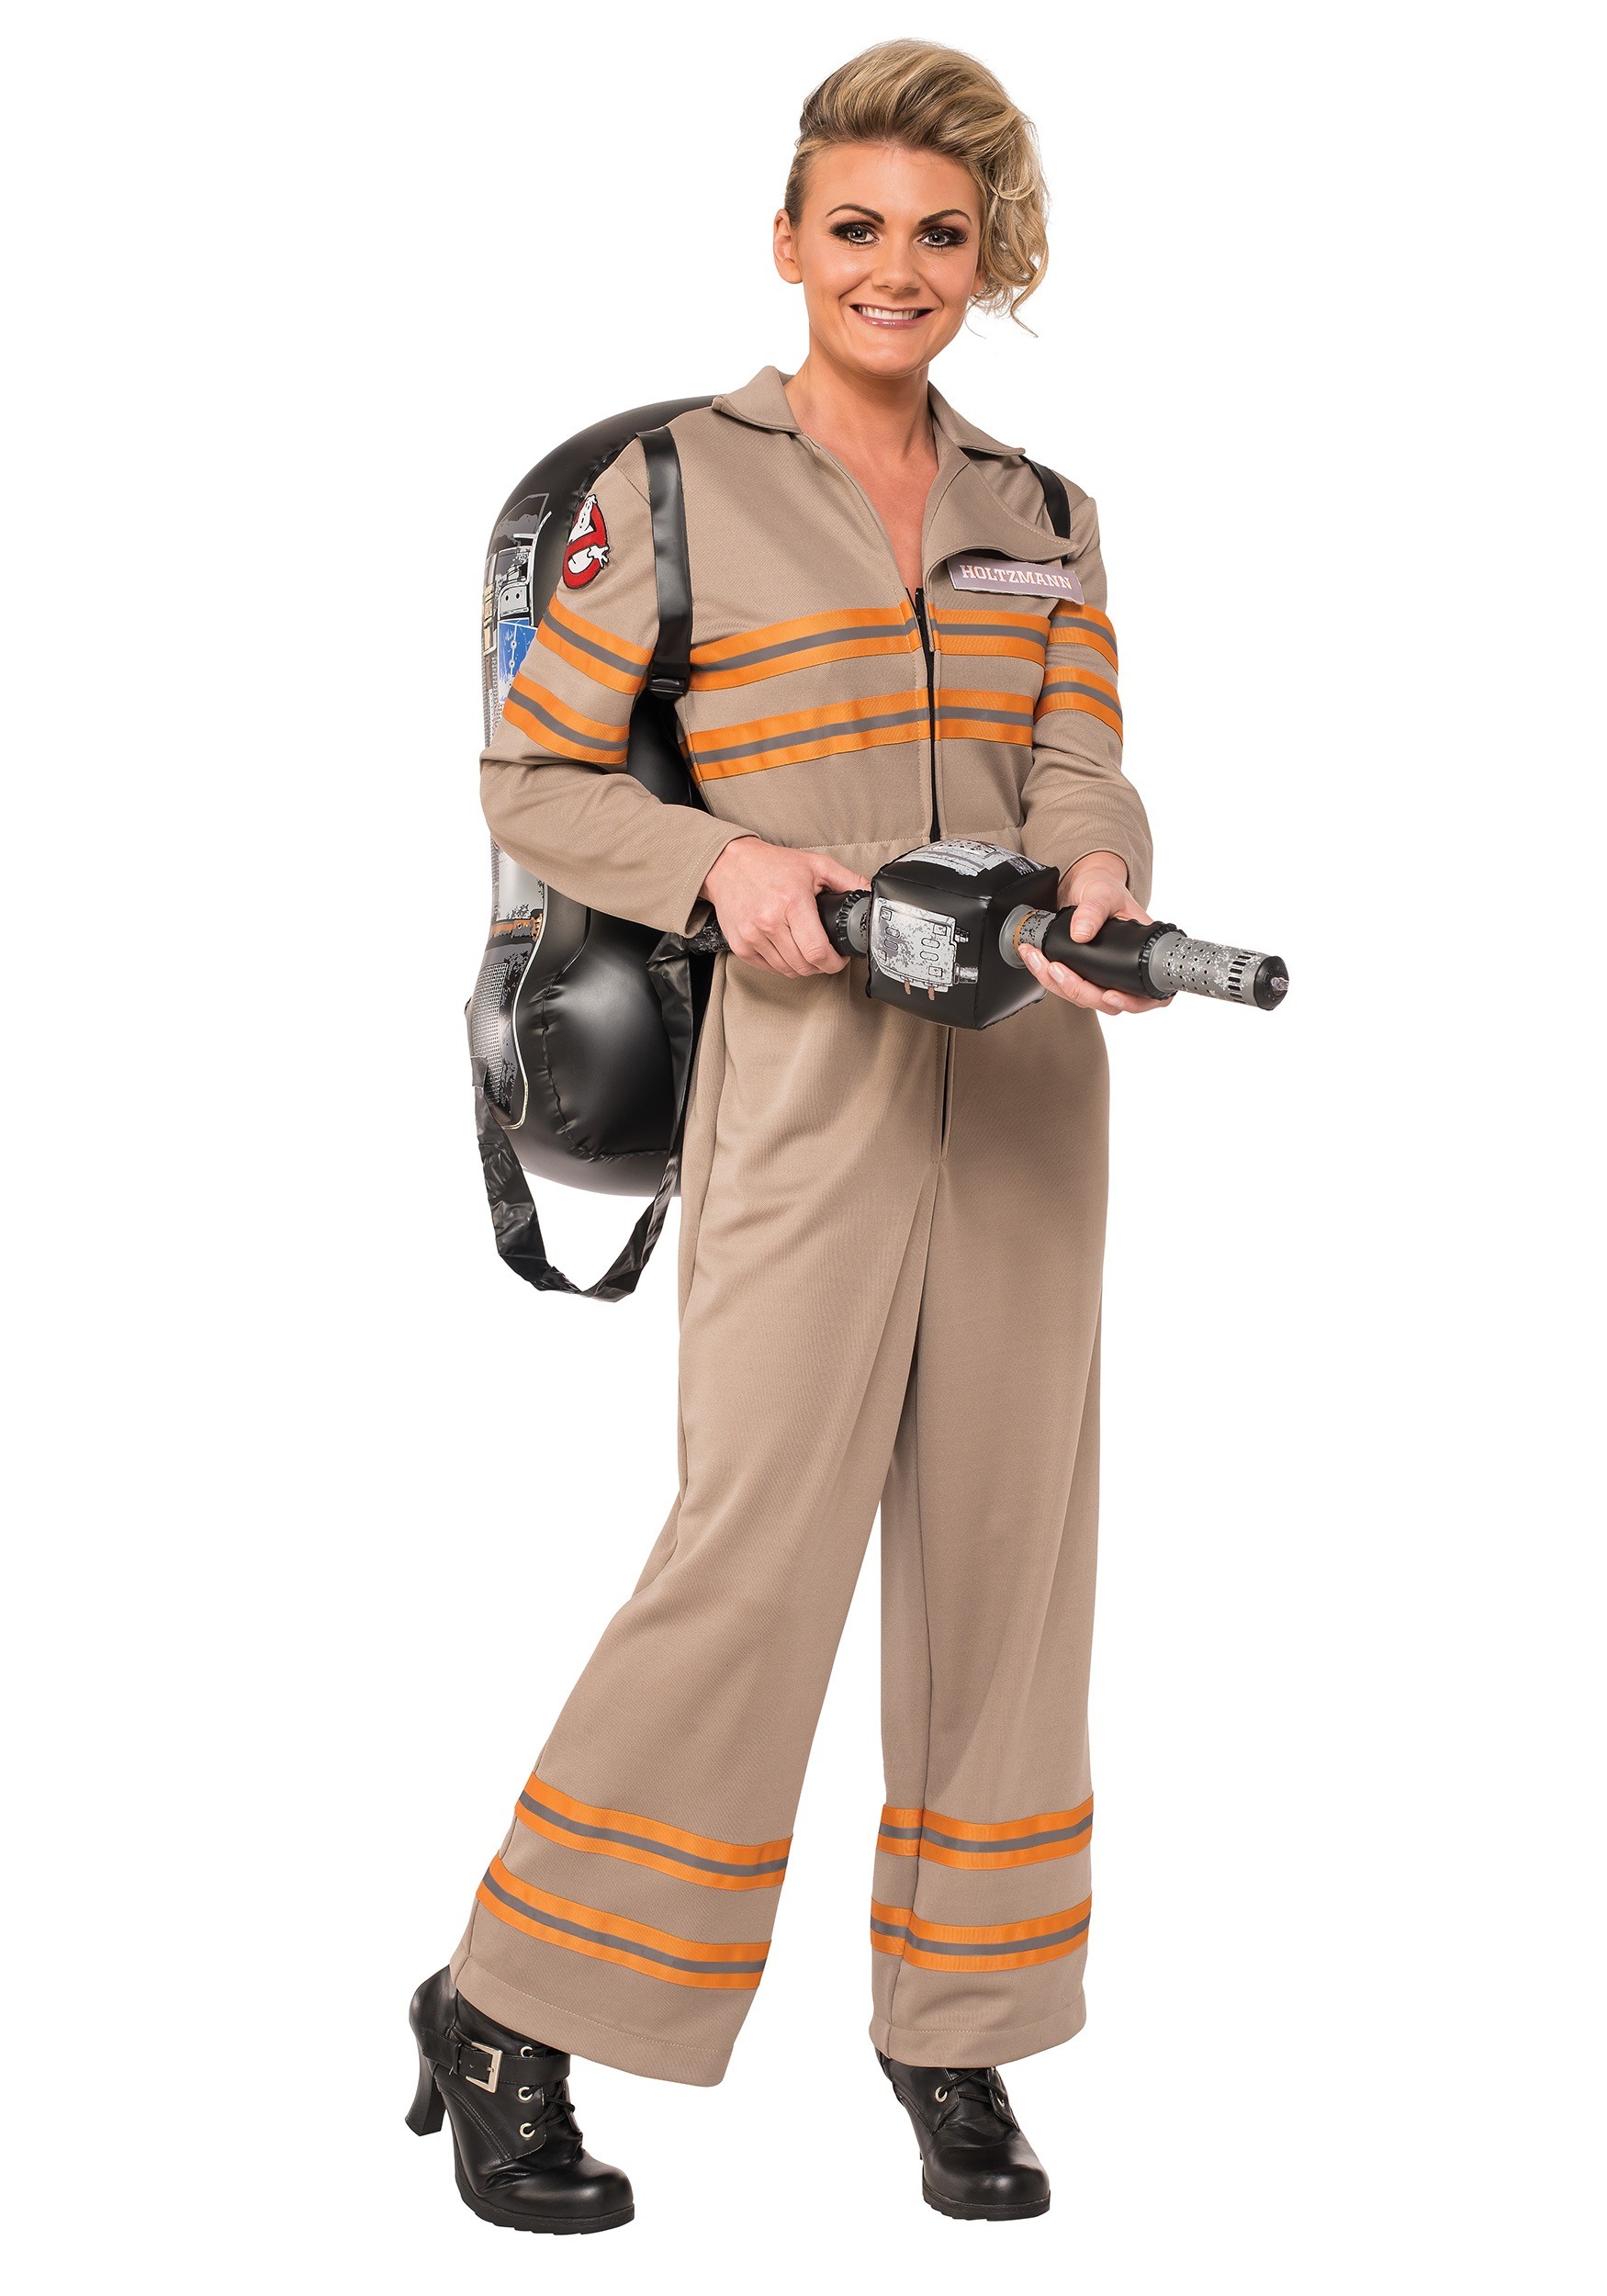 GEORGE Adult WOMEN Ghostbusters Halloween Costume Sizes 8-22 